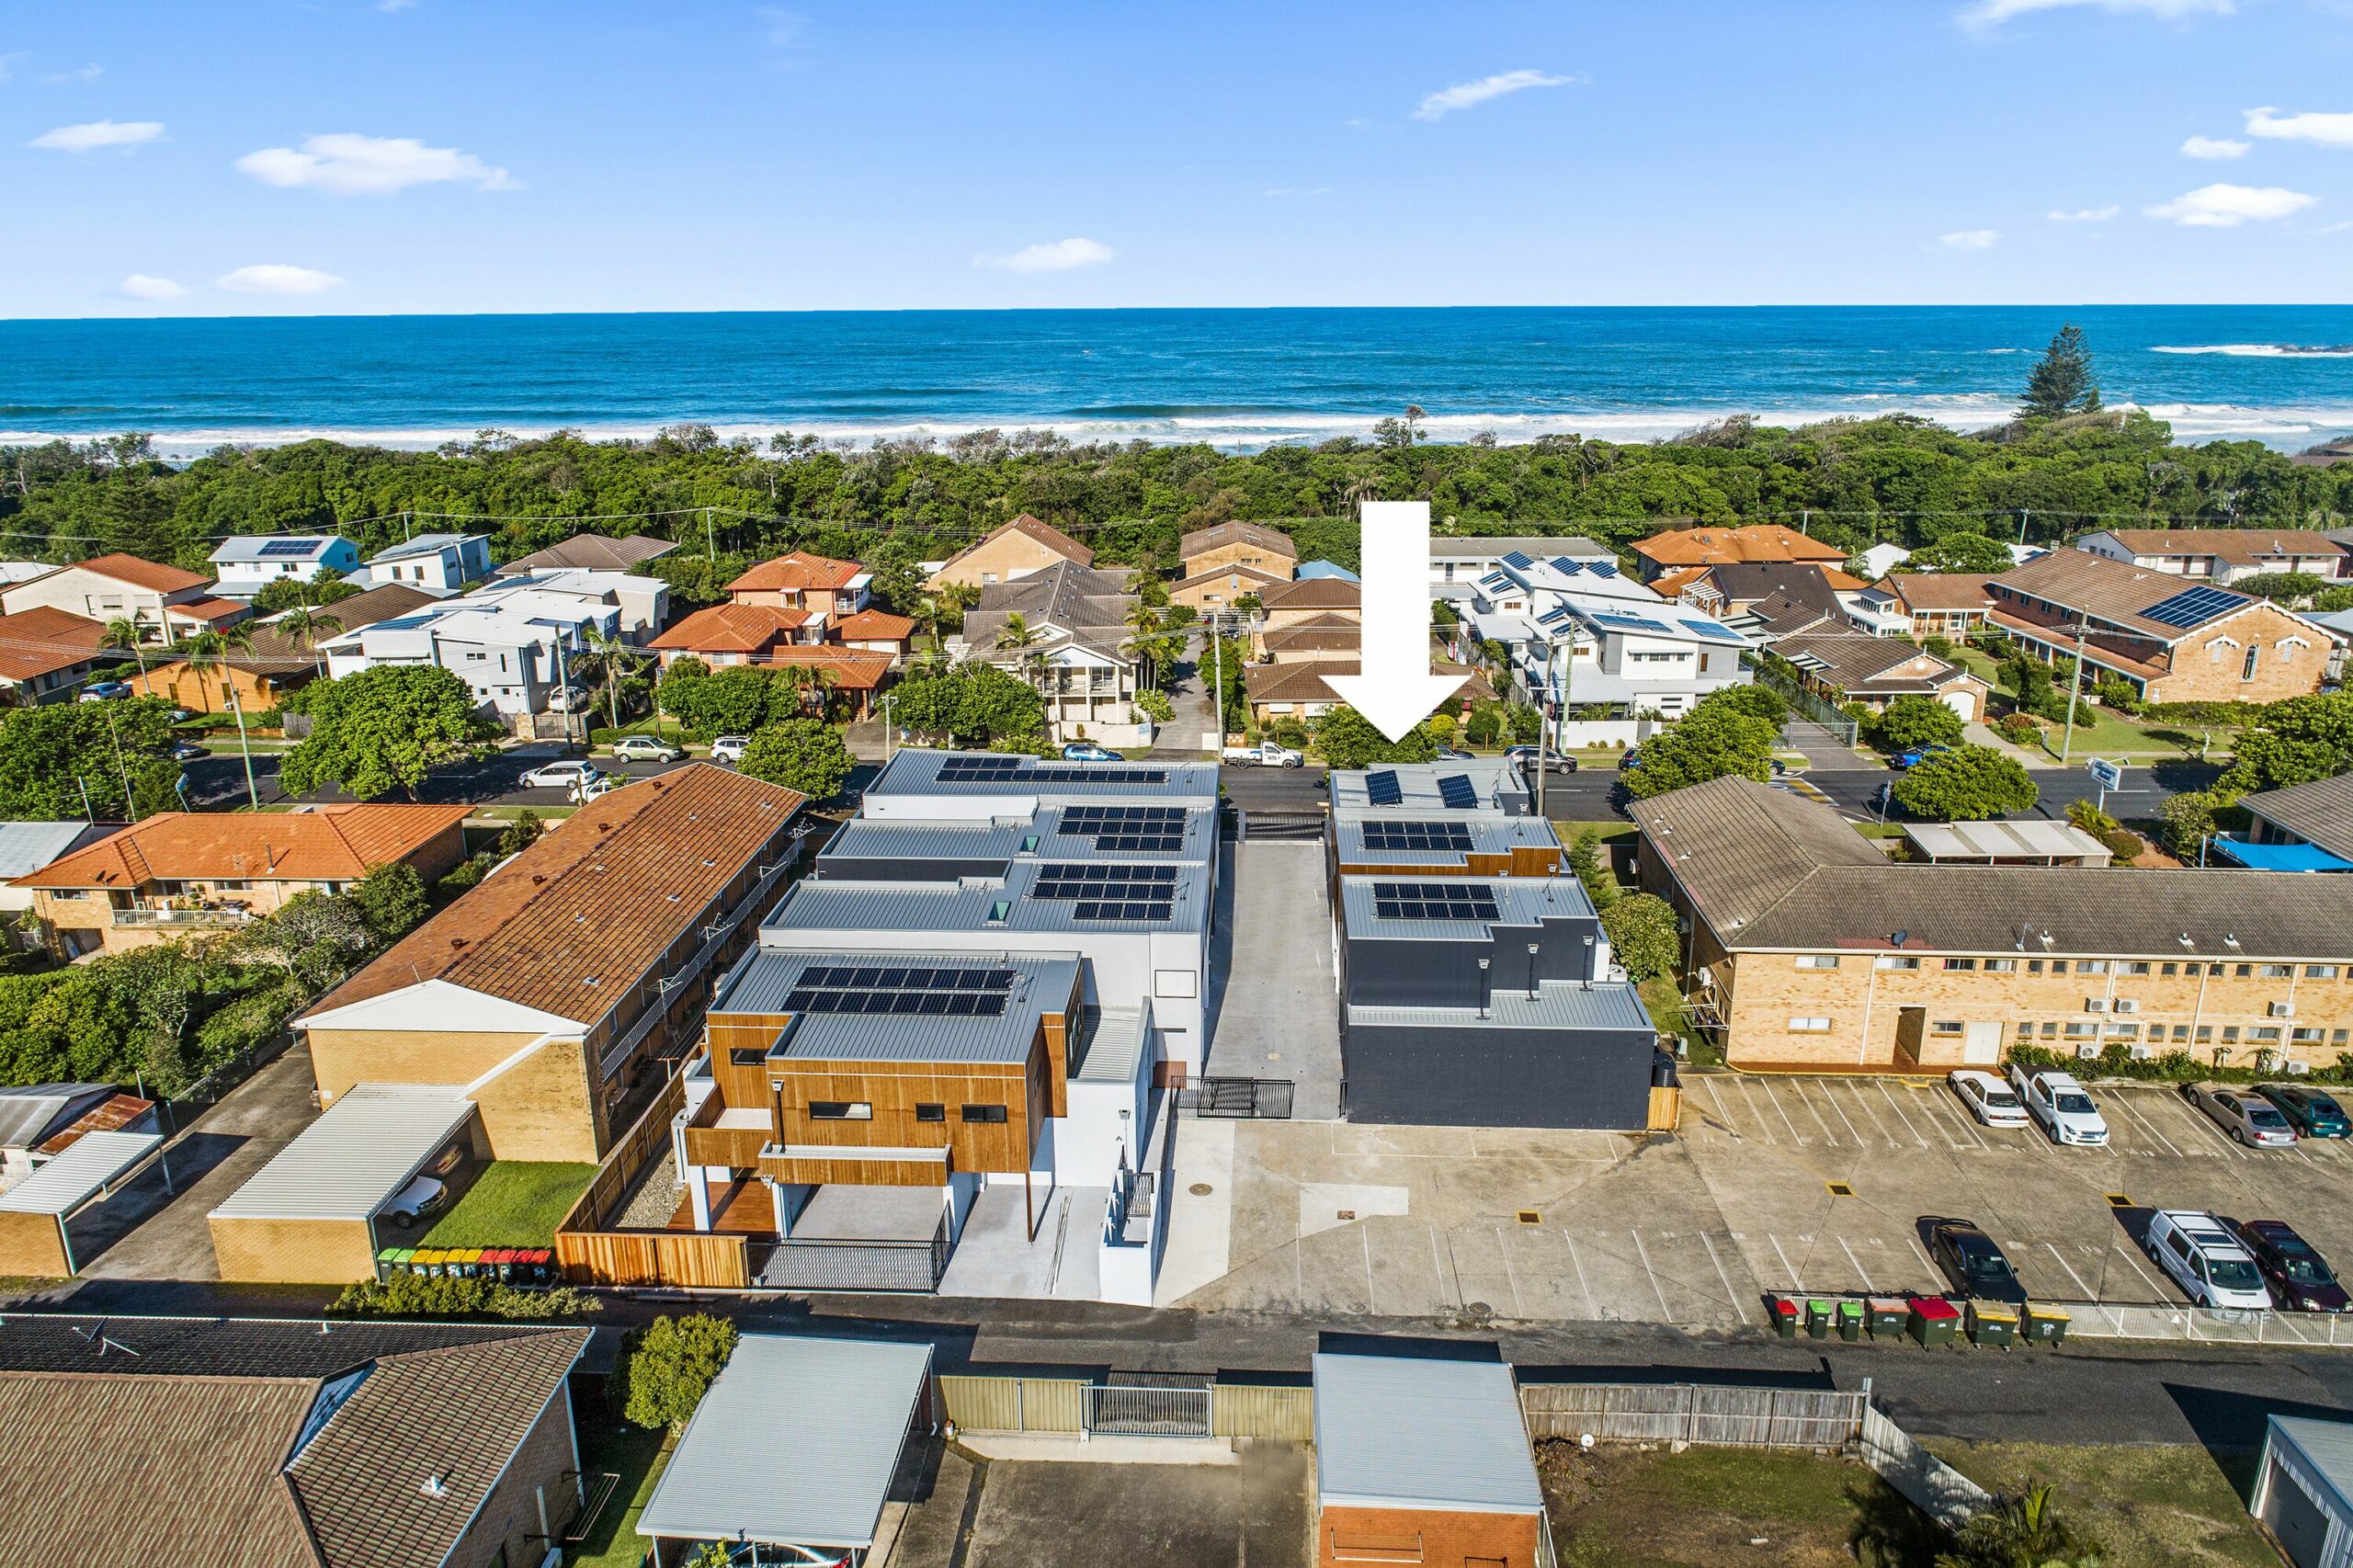 Suite 1 - Brand new Townhouse in Central Sawtell